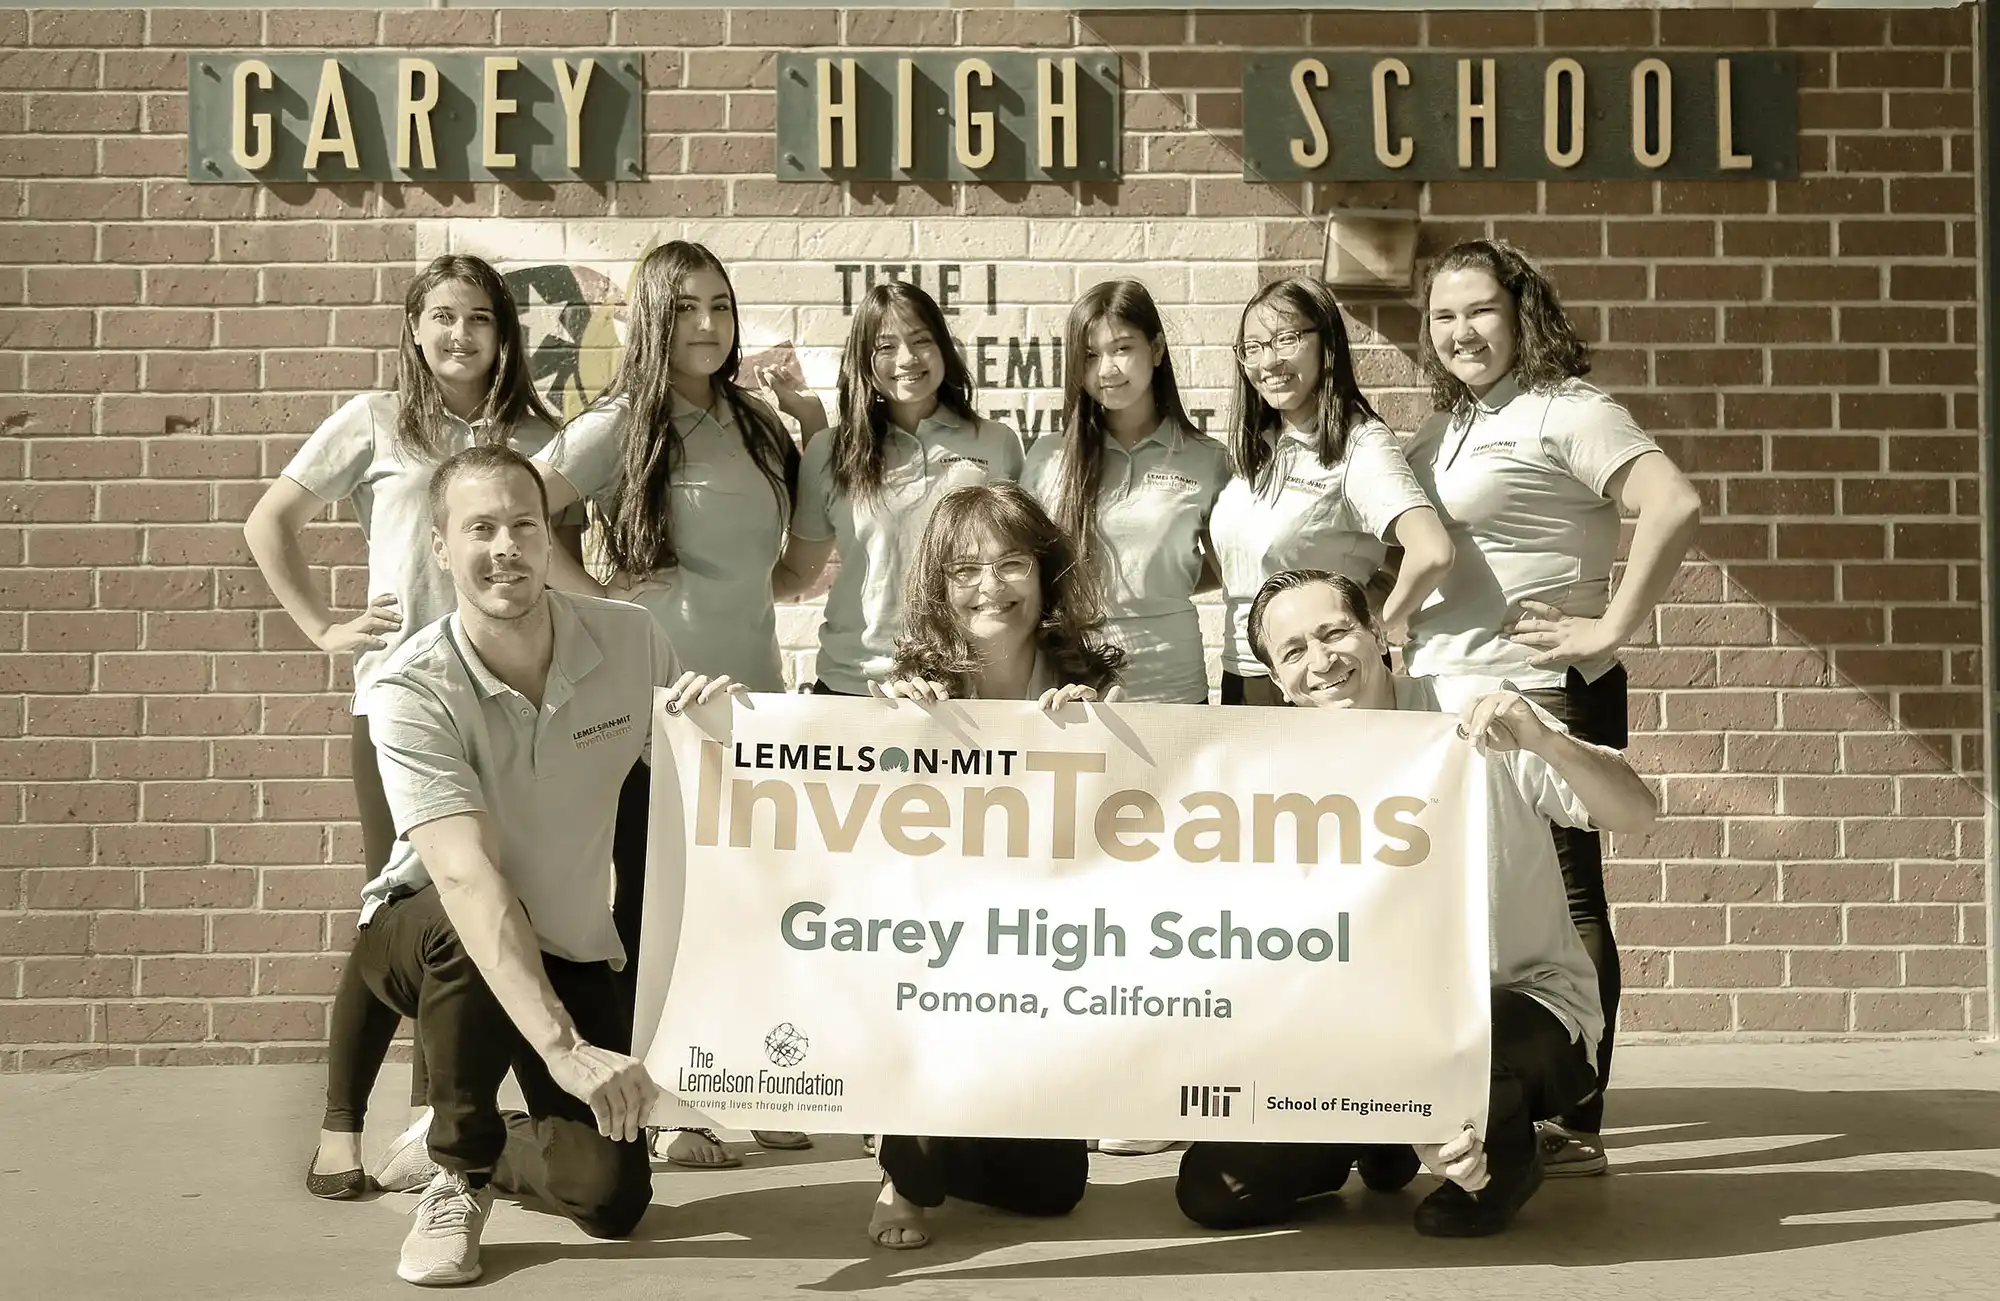 InvenTeams from Garey High School holding up a sign and smiling